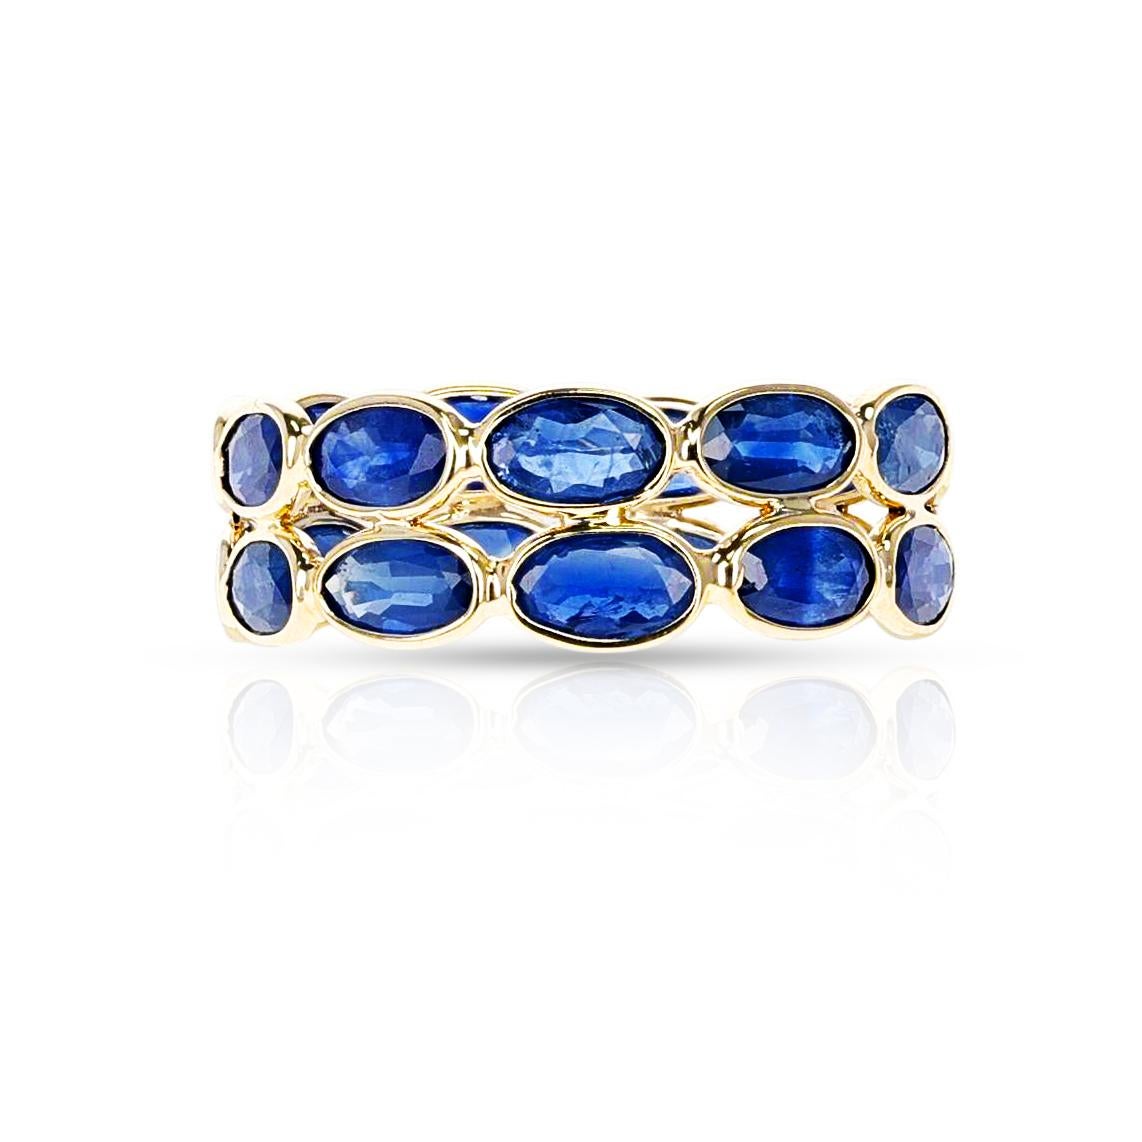 Shape: Oval

Stone: Blue Sapphire

Metal: 14 Karat Yellow Gold (can be customized)

Style: Triple Layer Band

Ring Size: US 7 (can be customized)

Stone Weight: appx. 5 carats of Sapphires

Total Weight: 2 grams